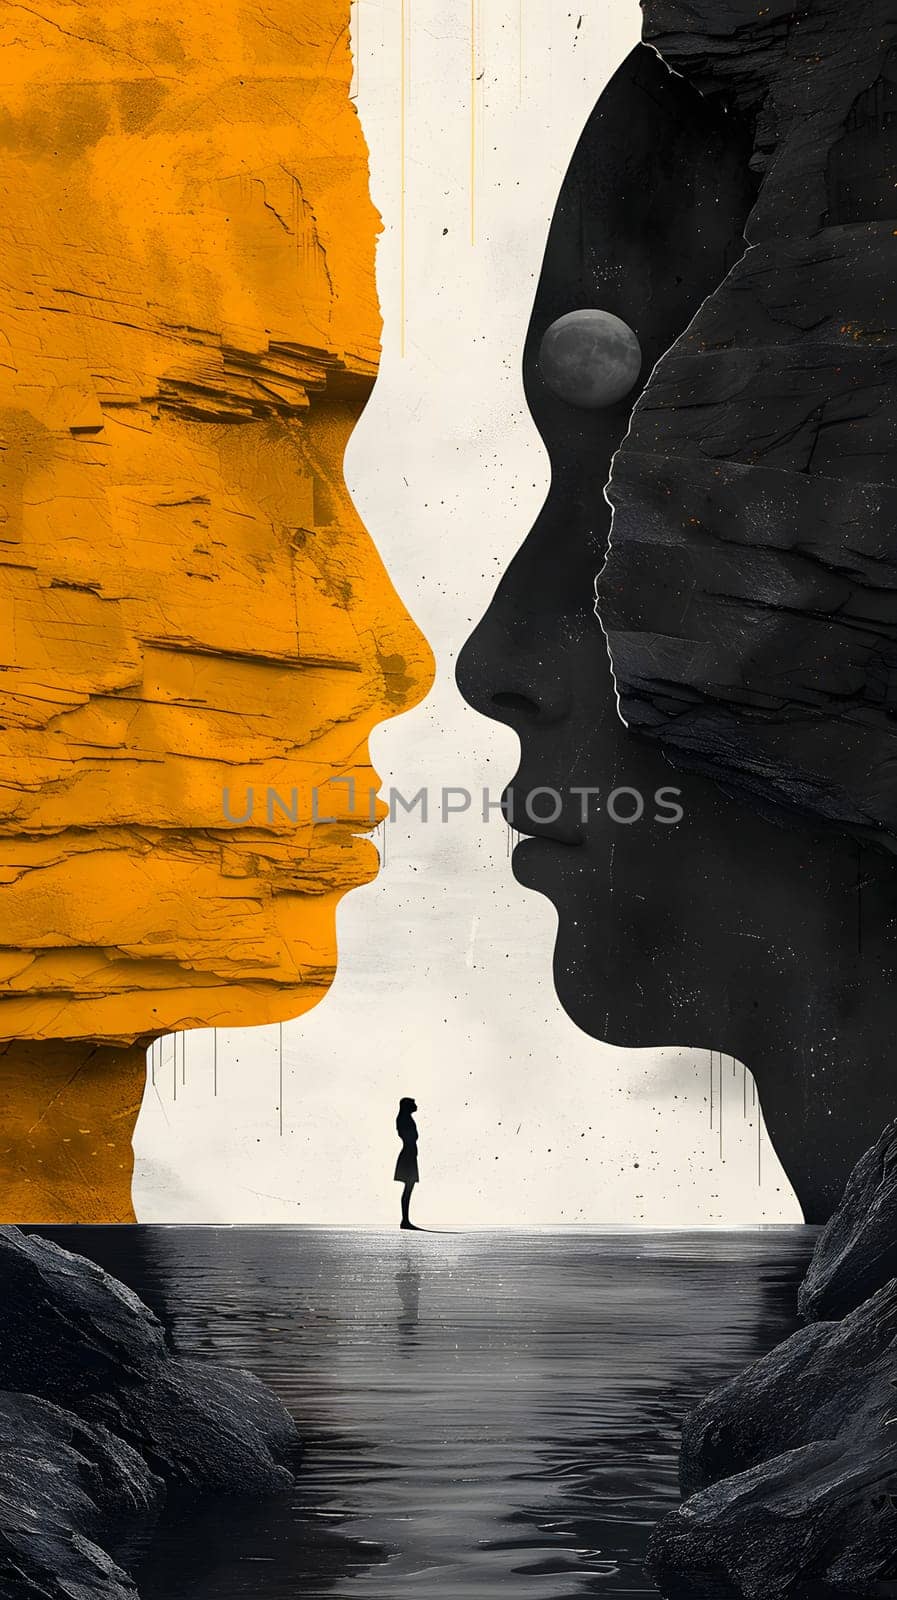 A man and a woman are admiring each others reflection in the calm waters of a tranquil lake, surrounded by a beautiful natural landscape of rocks, woods, and a picturesque formation